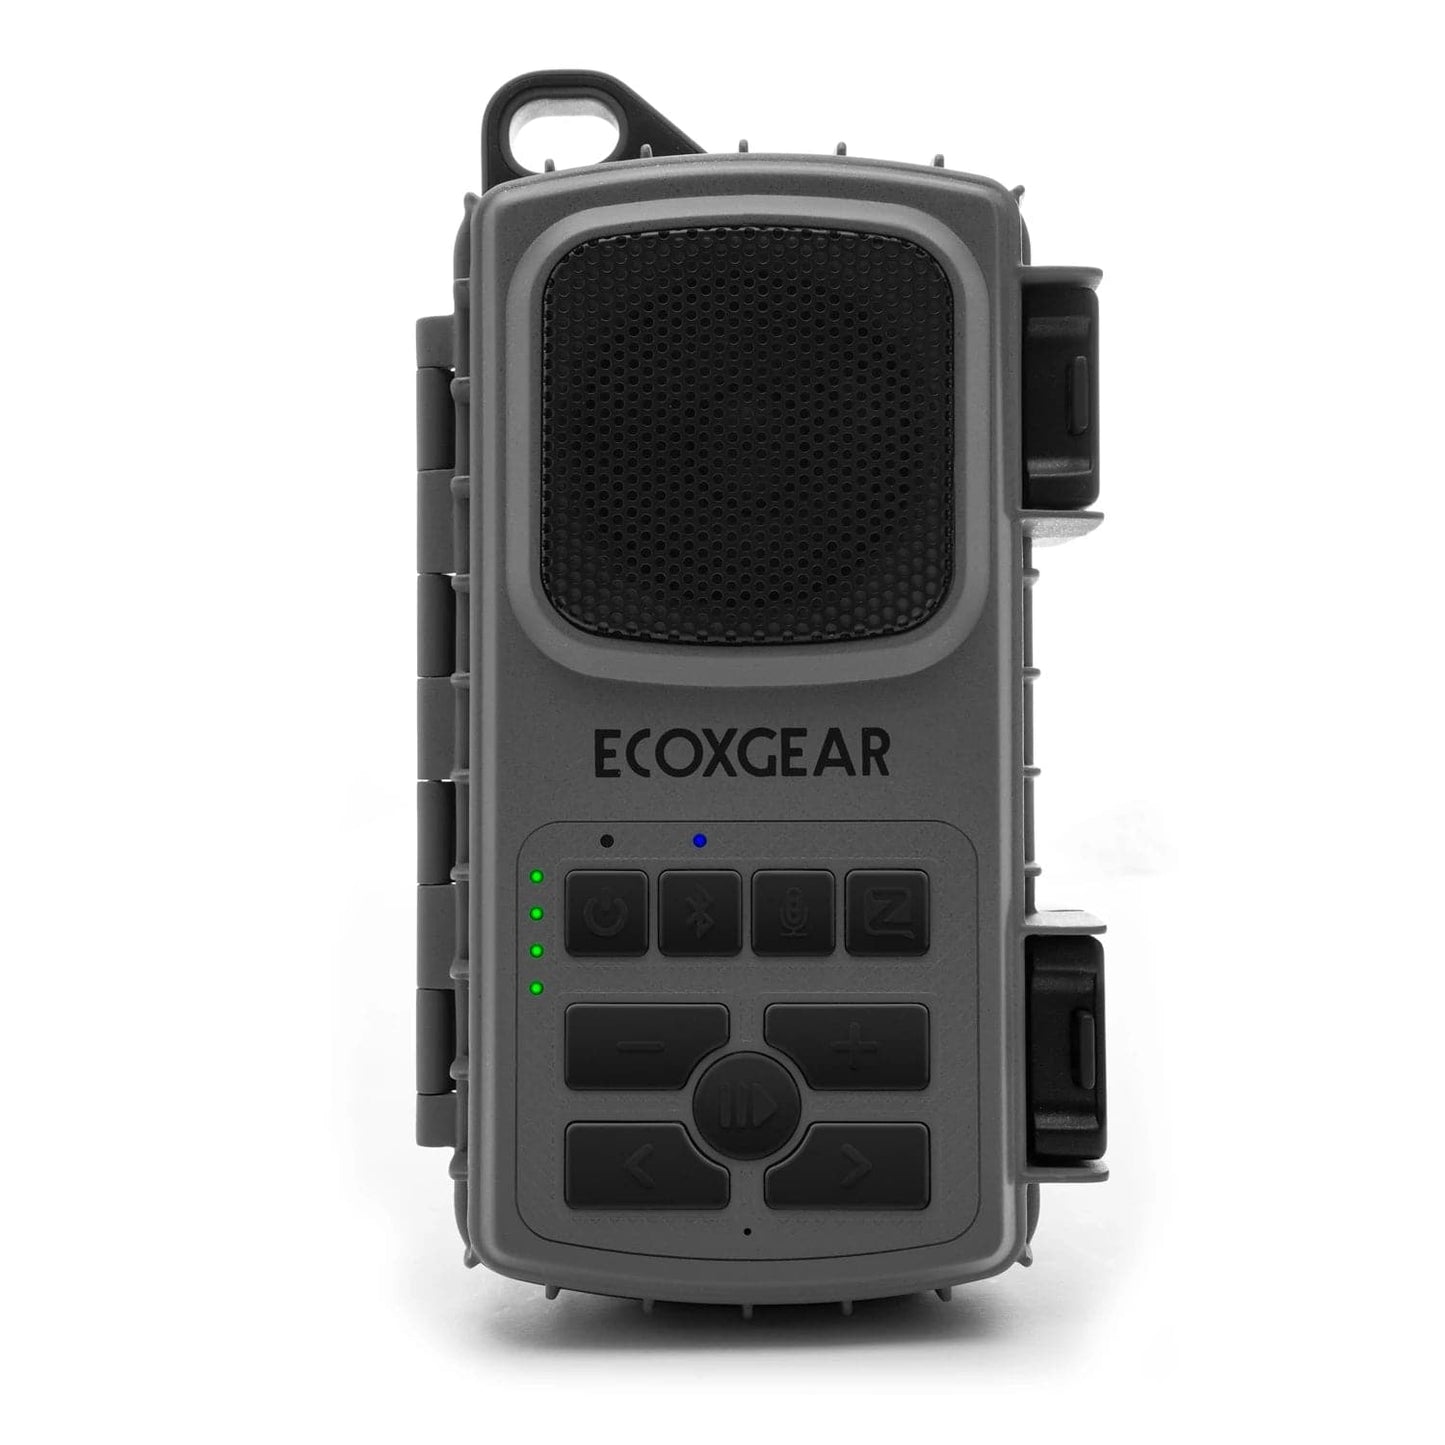 Featuring the EcoExtreme II electronic, speaker manufactured by EcoXGear shown here from one angle.